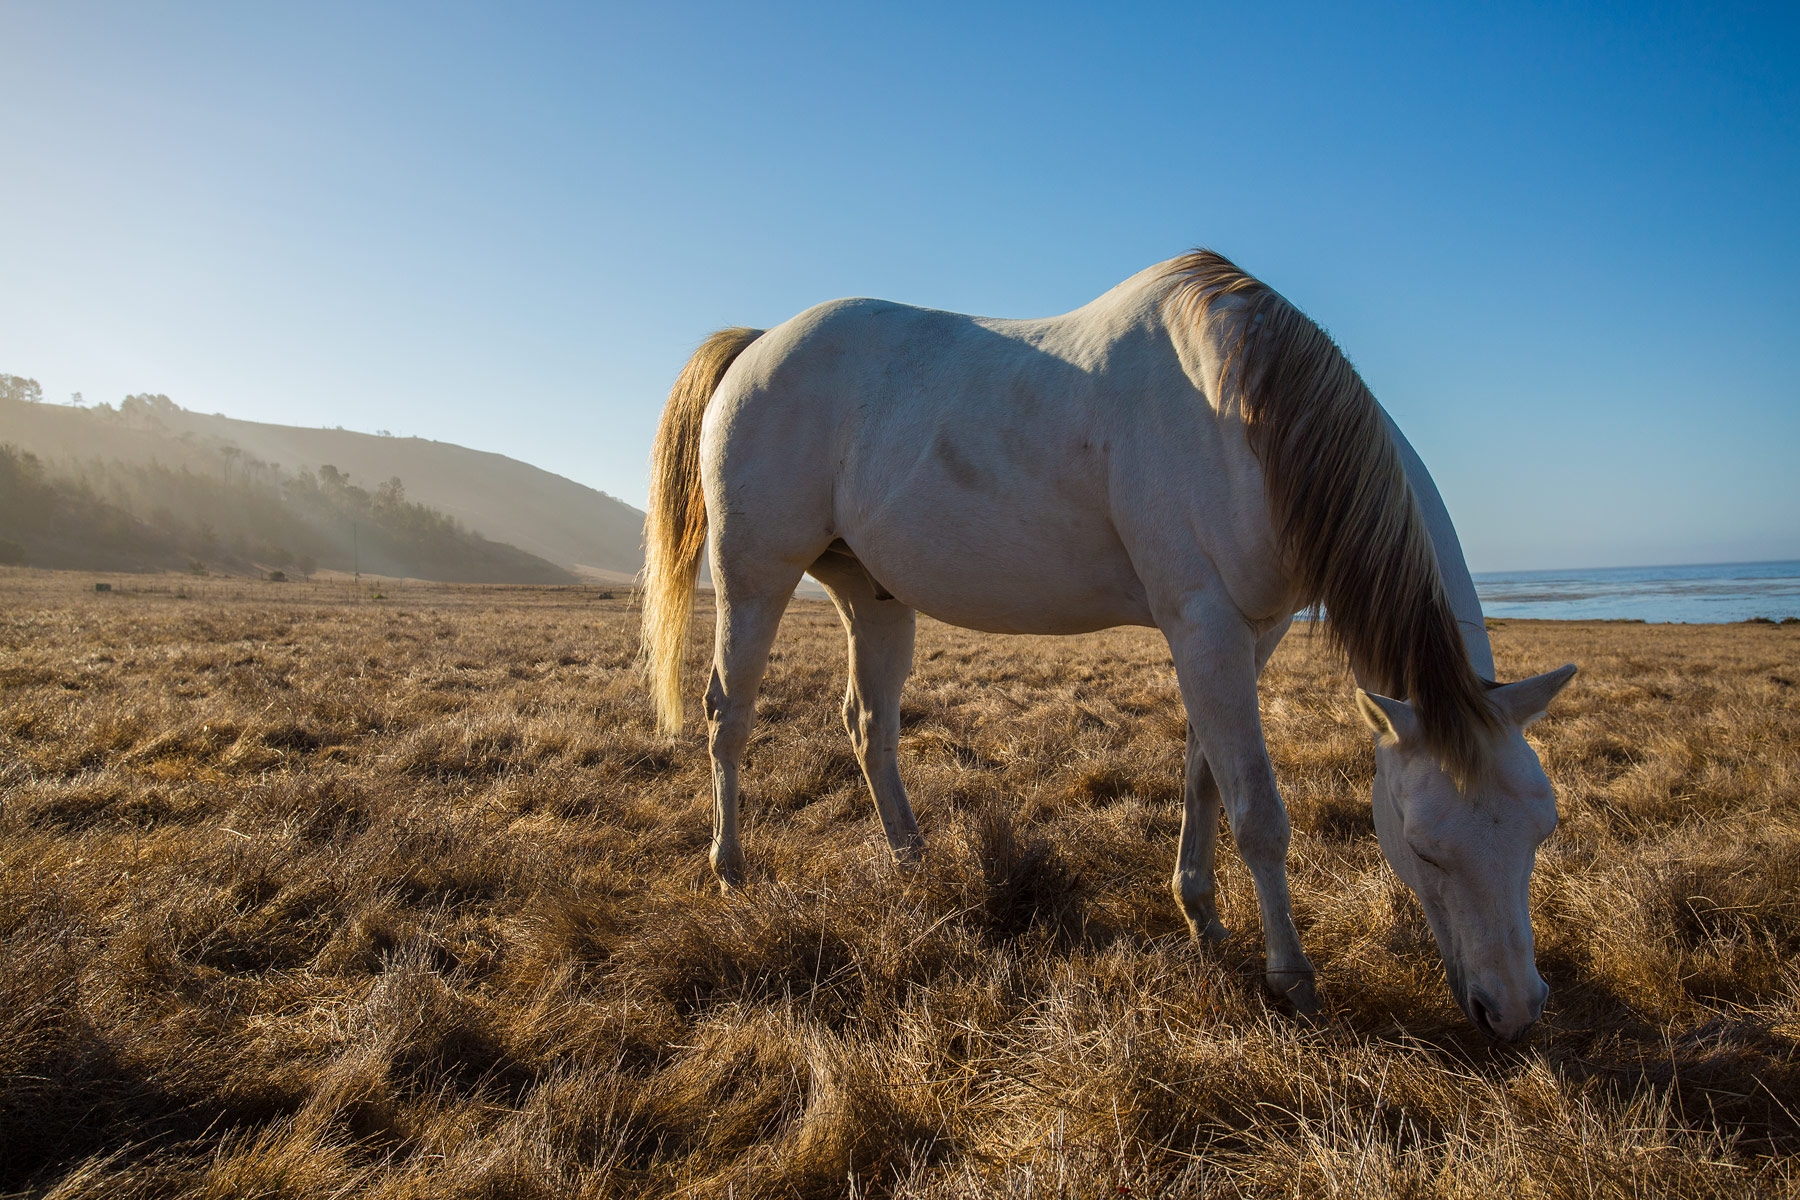 One of the Canestro family’s four horses was inherited from Sedgwick Reserve, another of UCSB’s natural reserves.